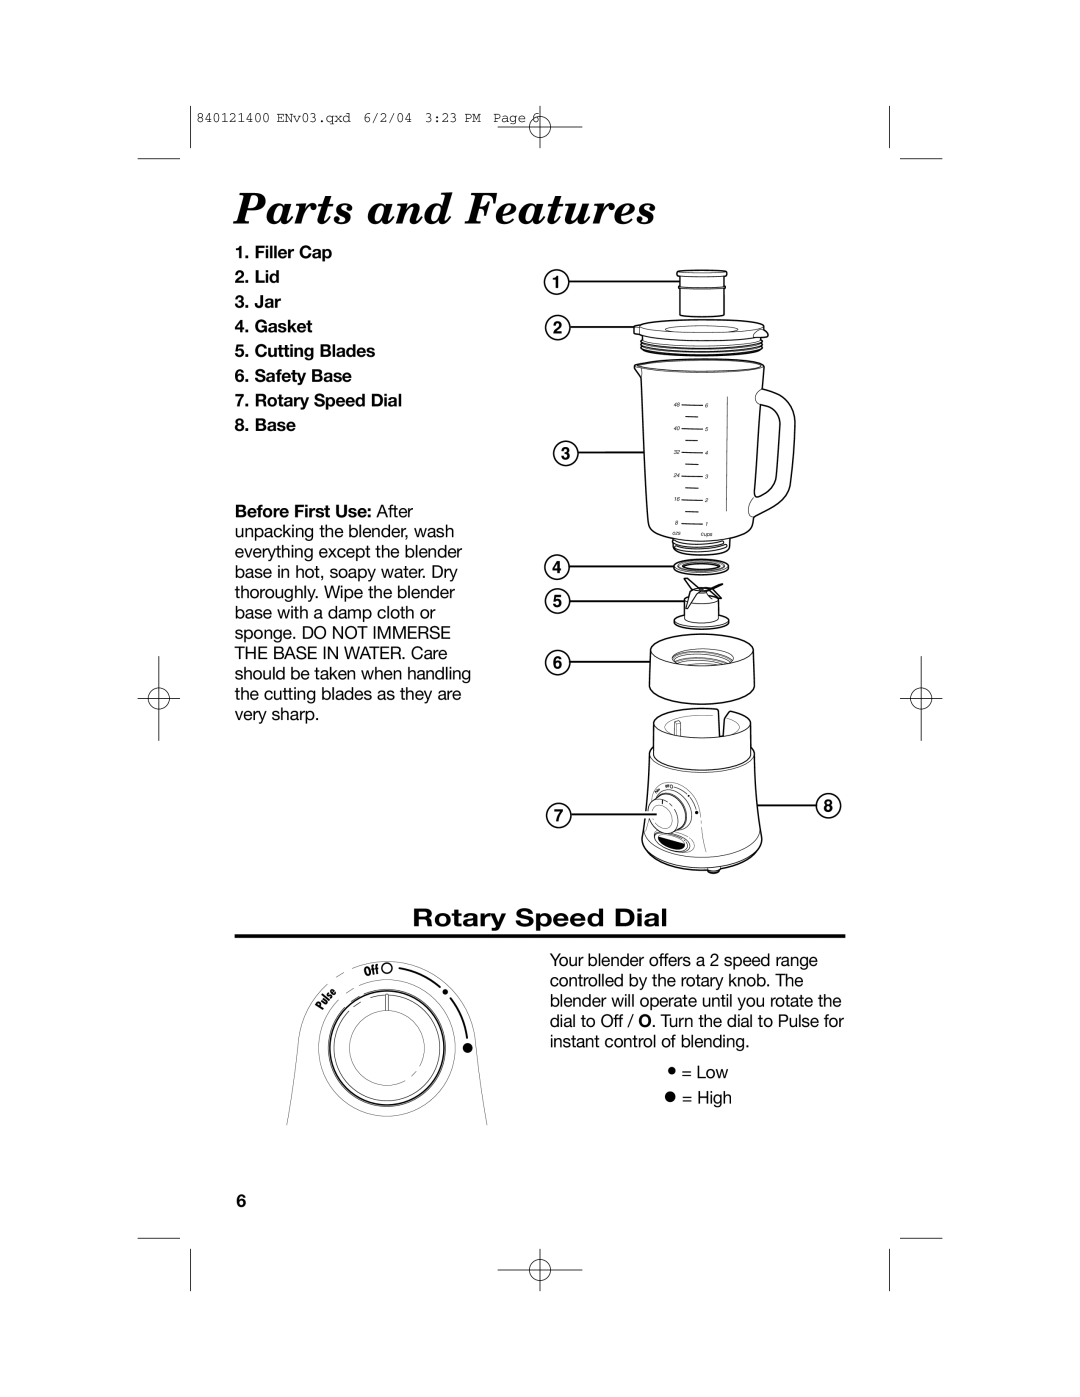 Hamilton Beach All-Metal Blender manual Parts and Features, Rotary Speed Dial, Filler Cap 2. Lid 3. Jar 4. Gasket 